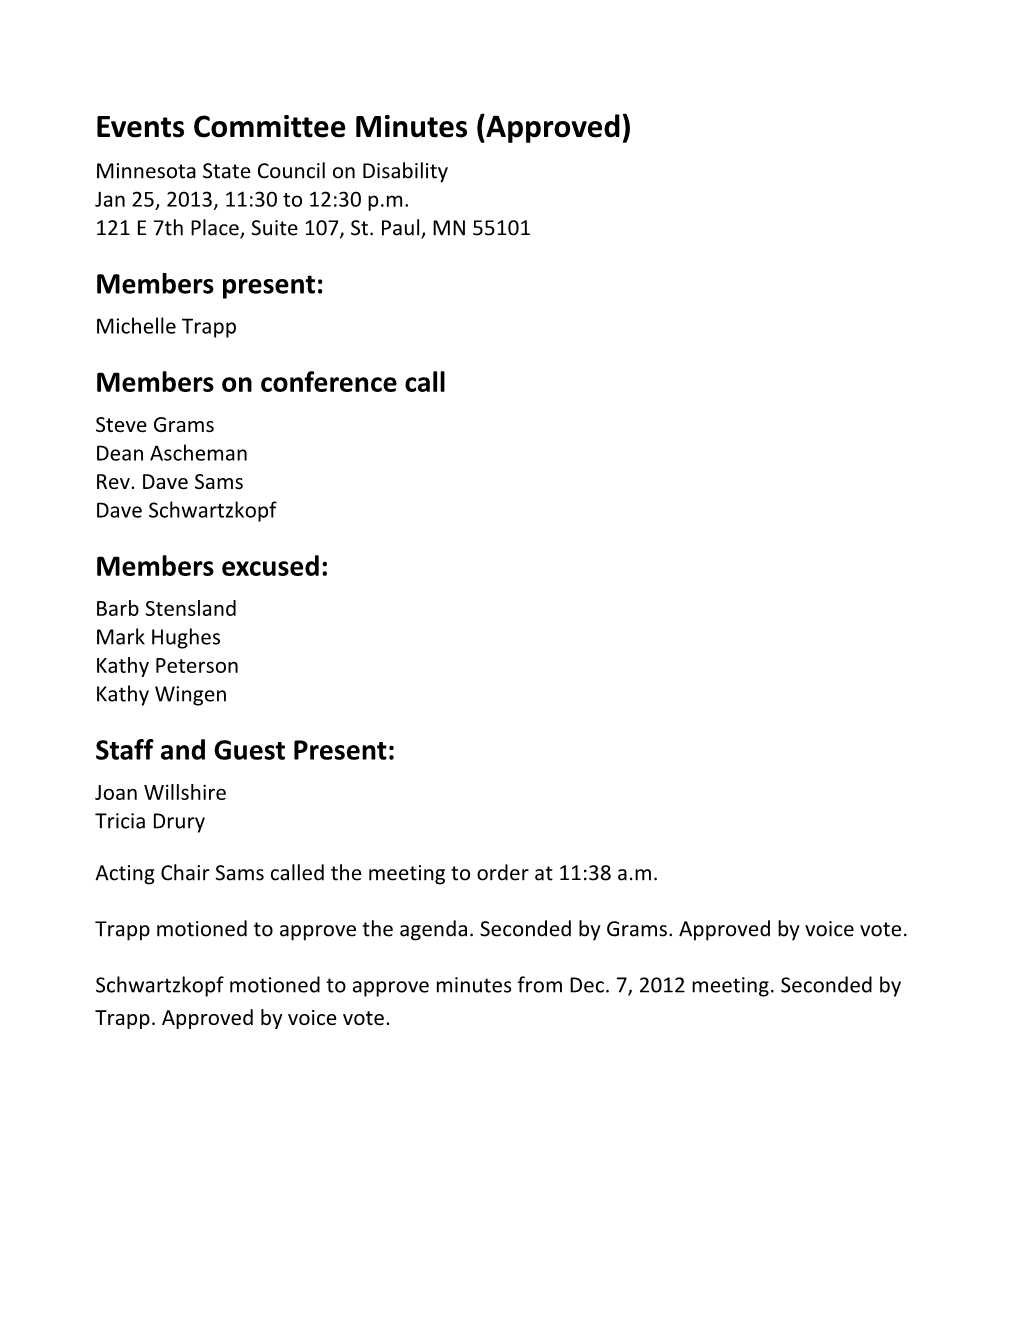 MSCOD Events Committee Meeting Minutes, 01/25/2013